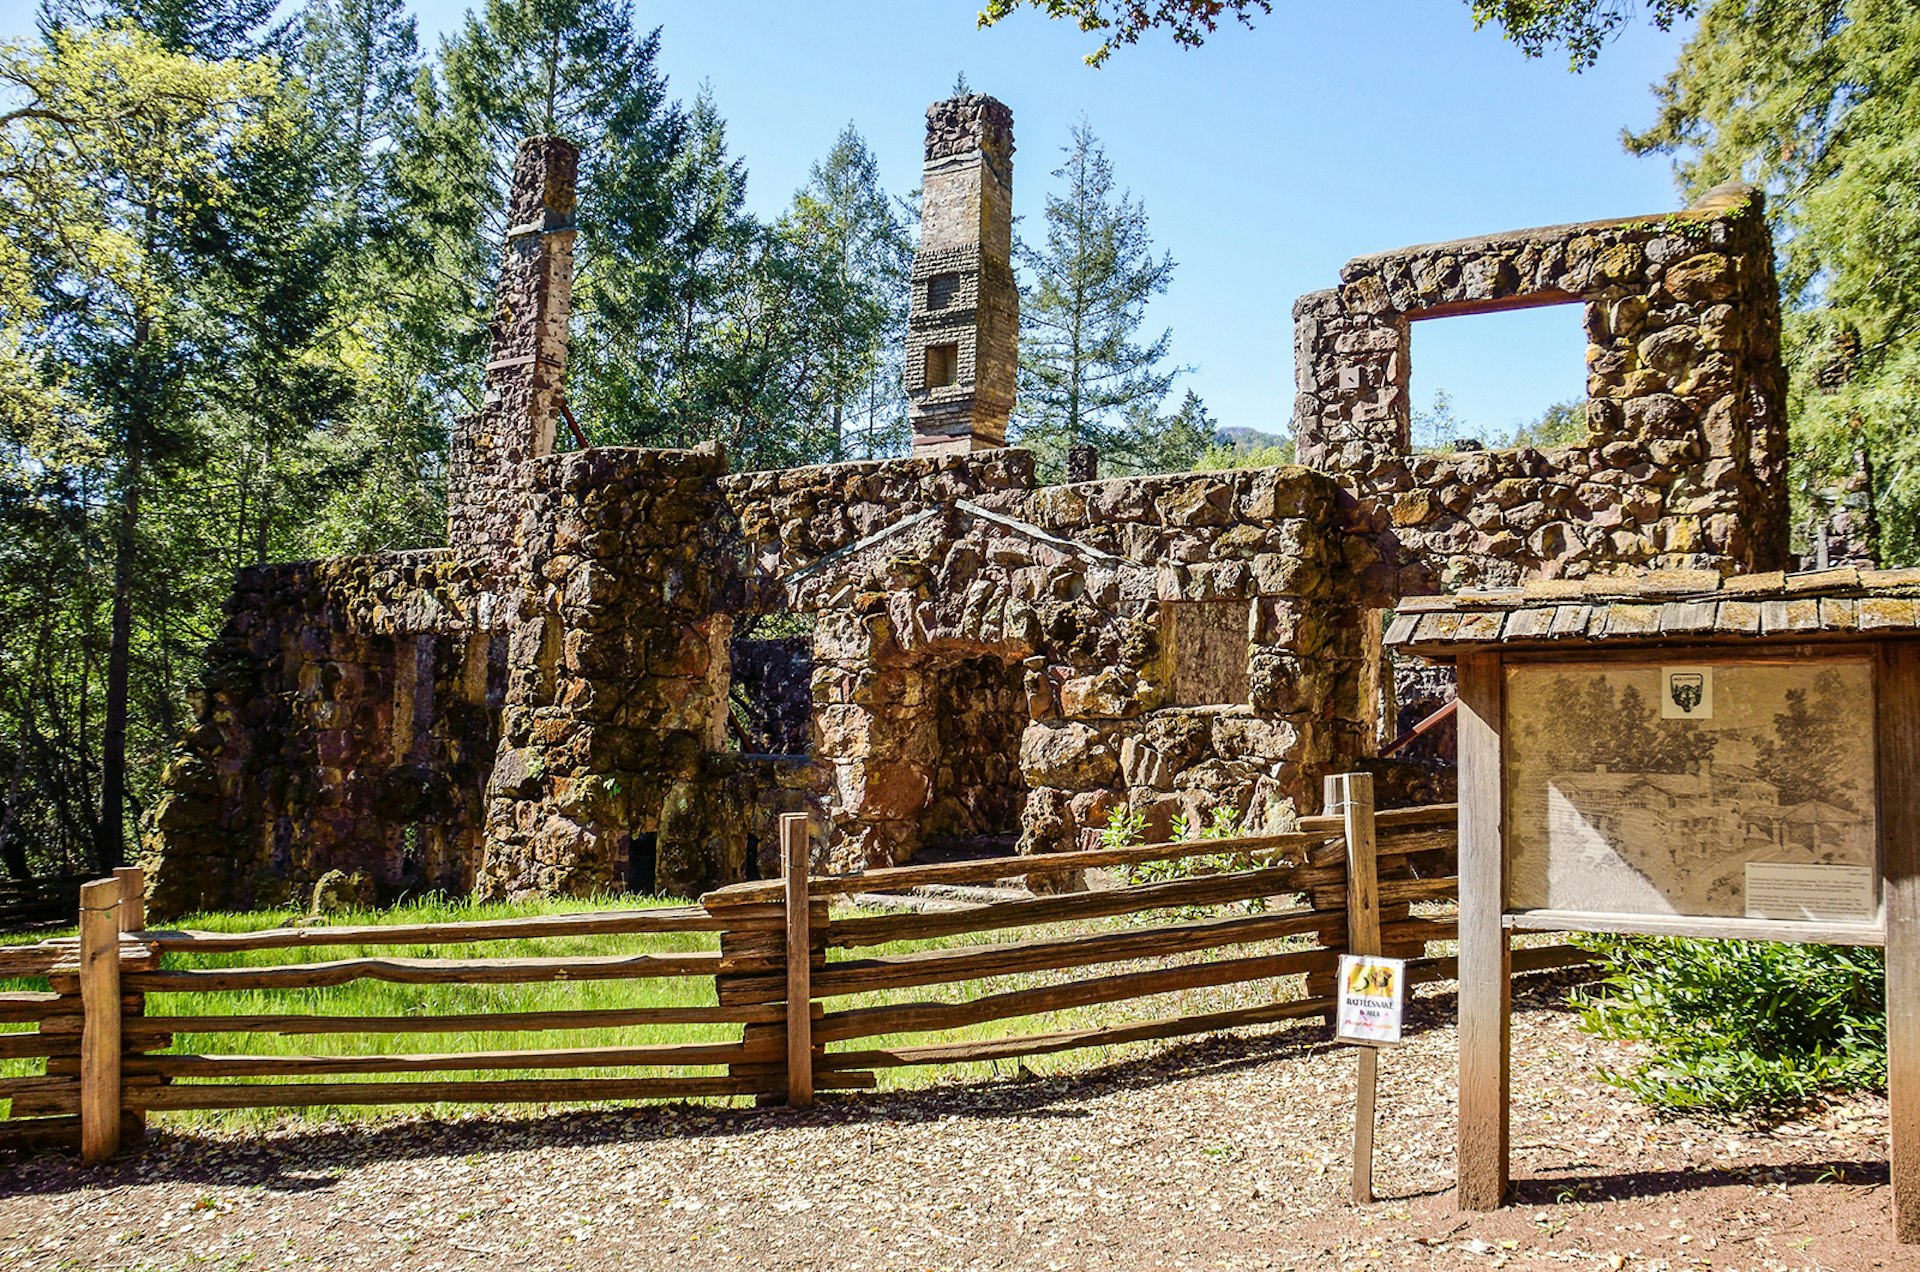 A stone house in Jack London State Historic Park, California